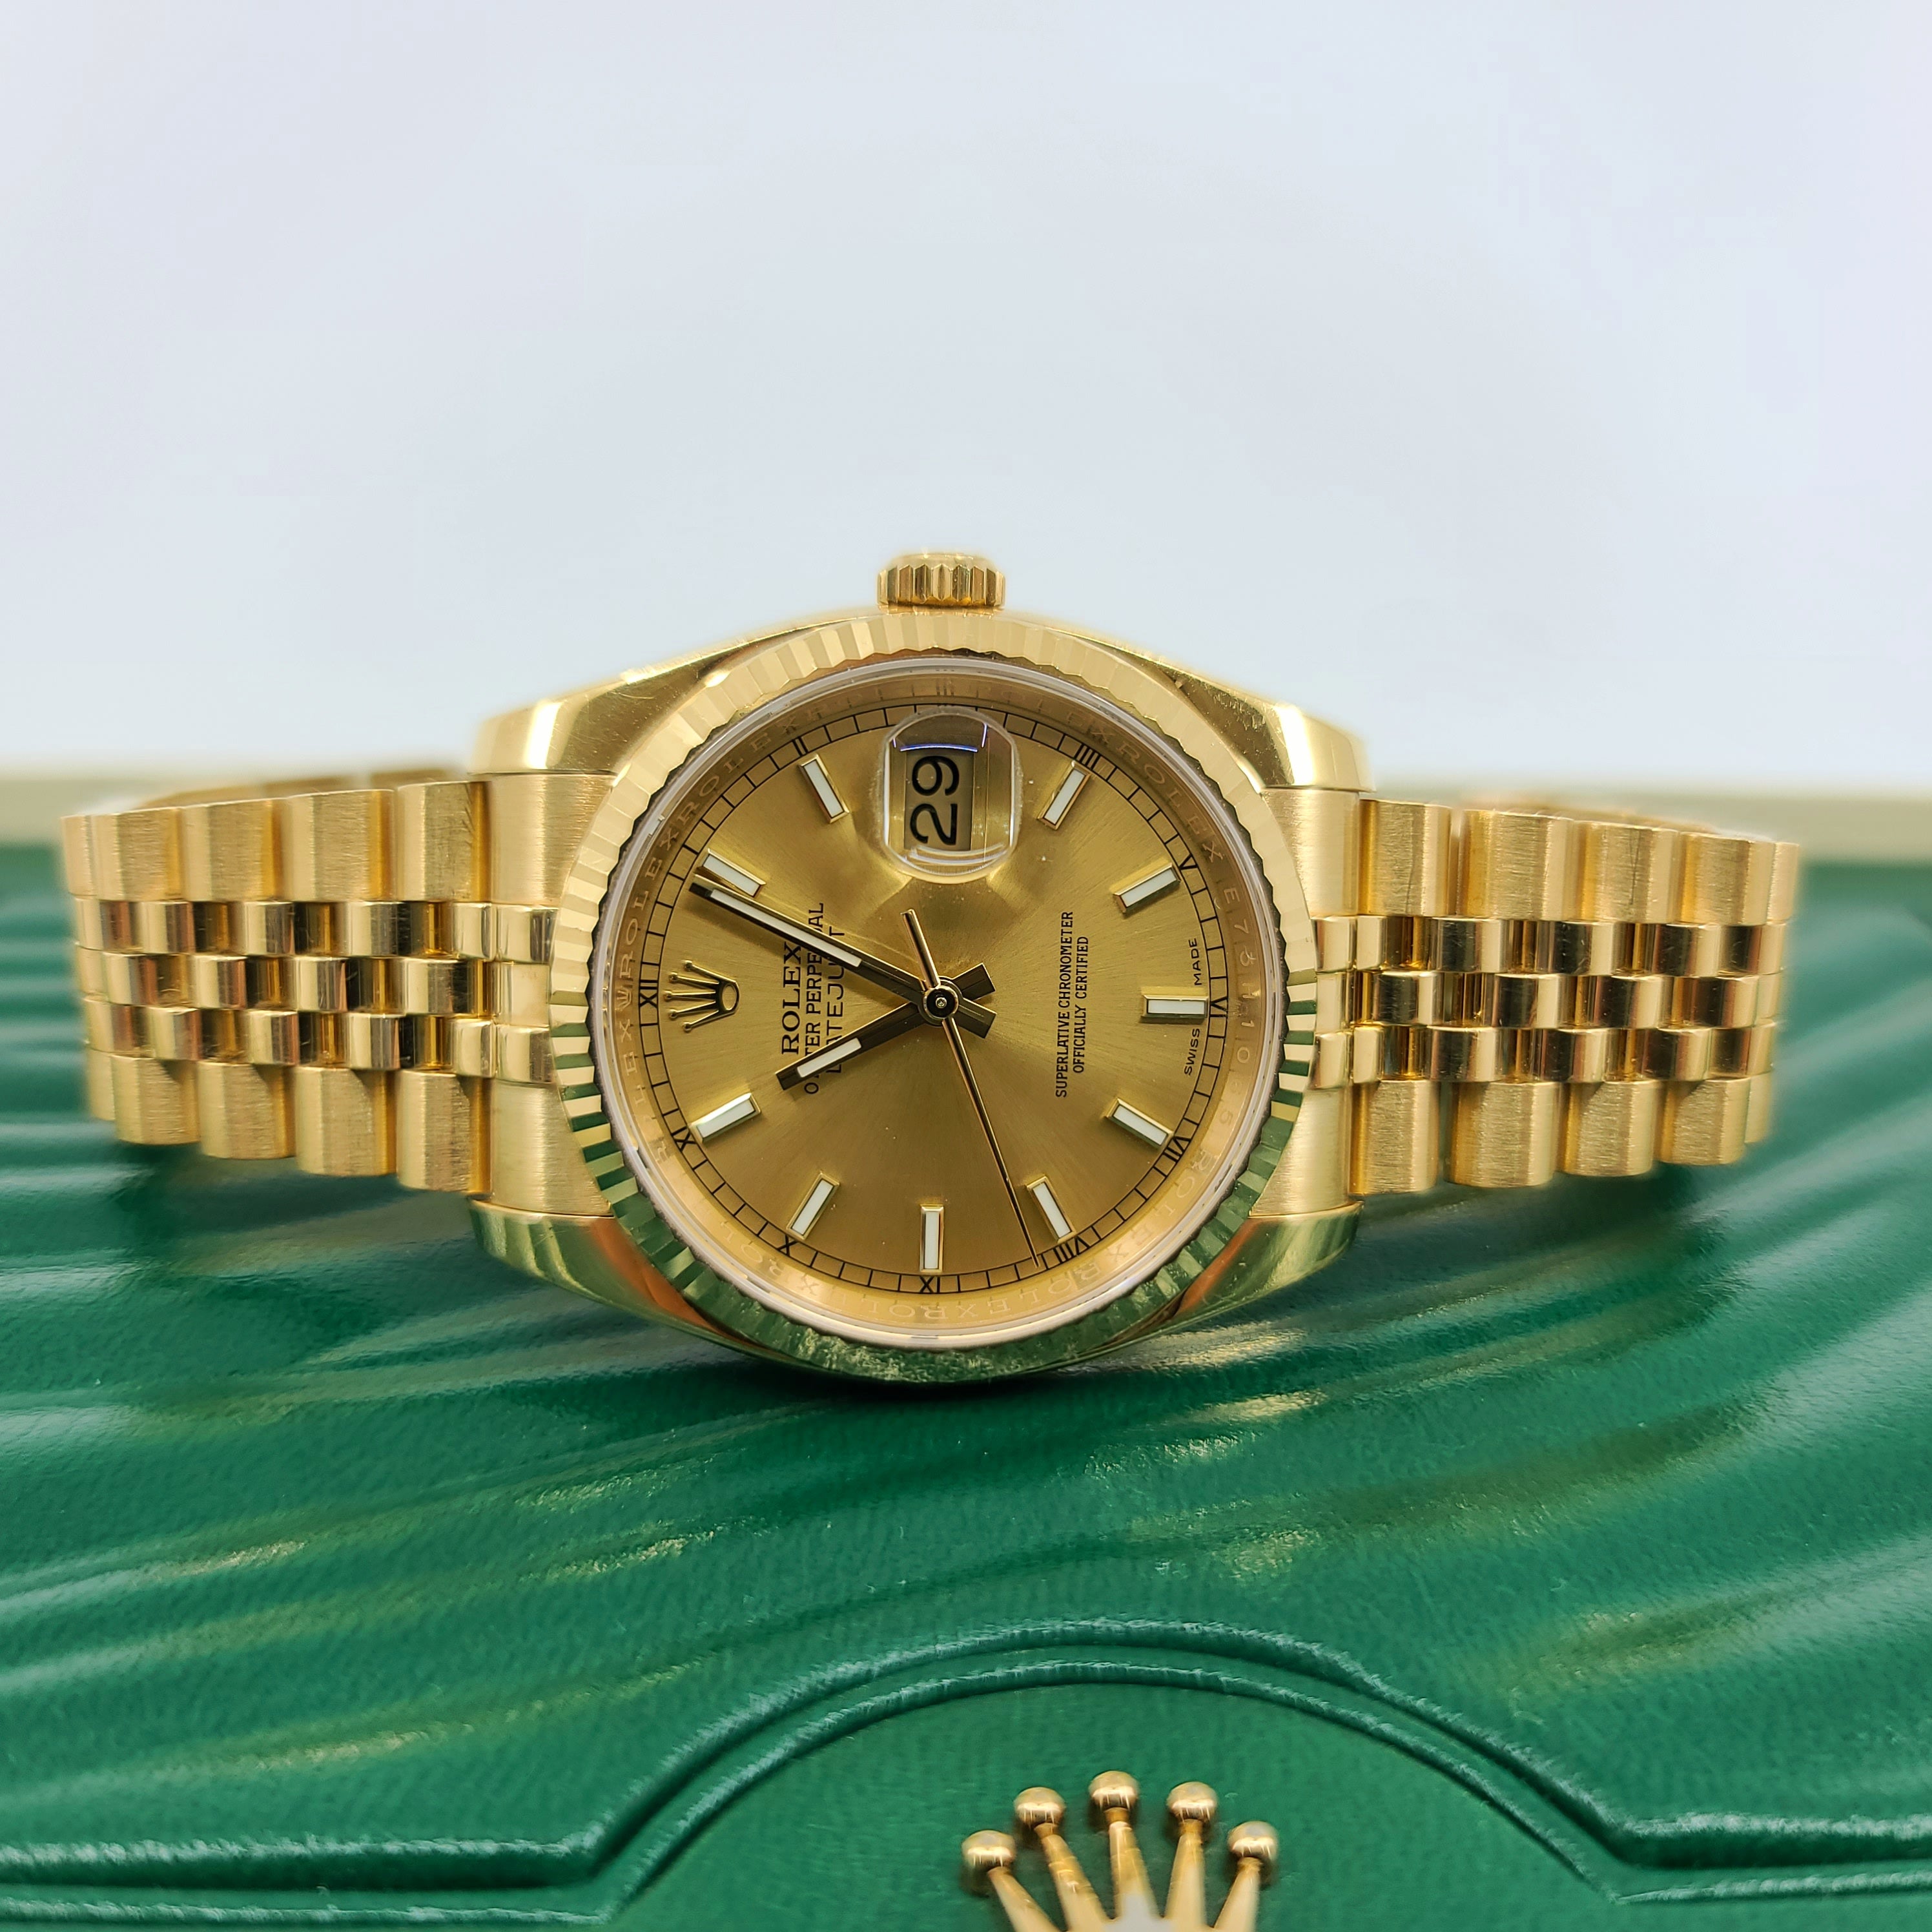 2015 Year Rolex 116238 Datejust 36 Solid Gold Fluted Bezel rolex official price $29,050.00 + tax